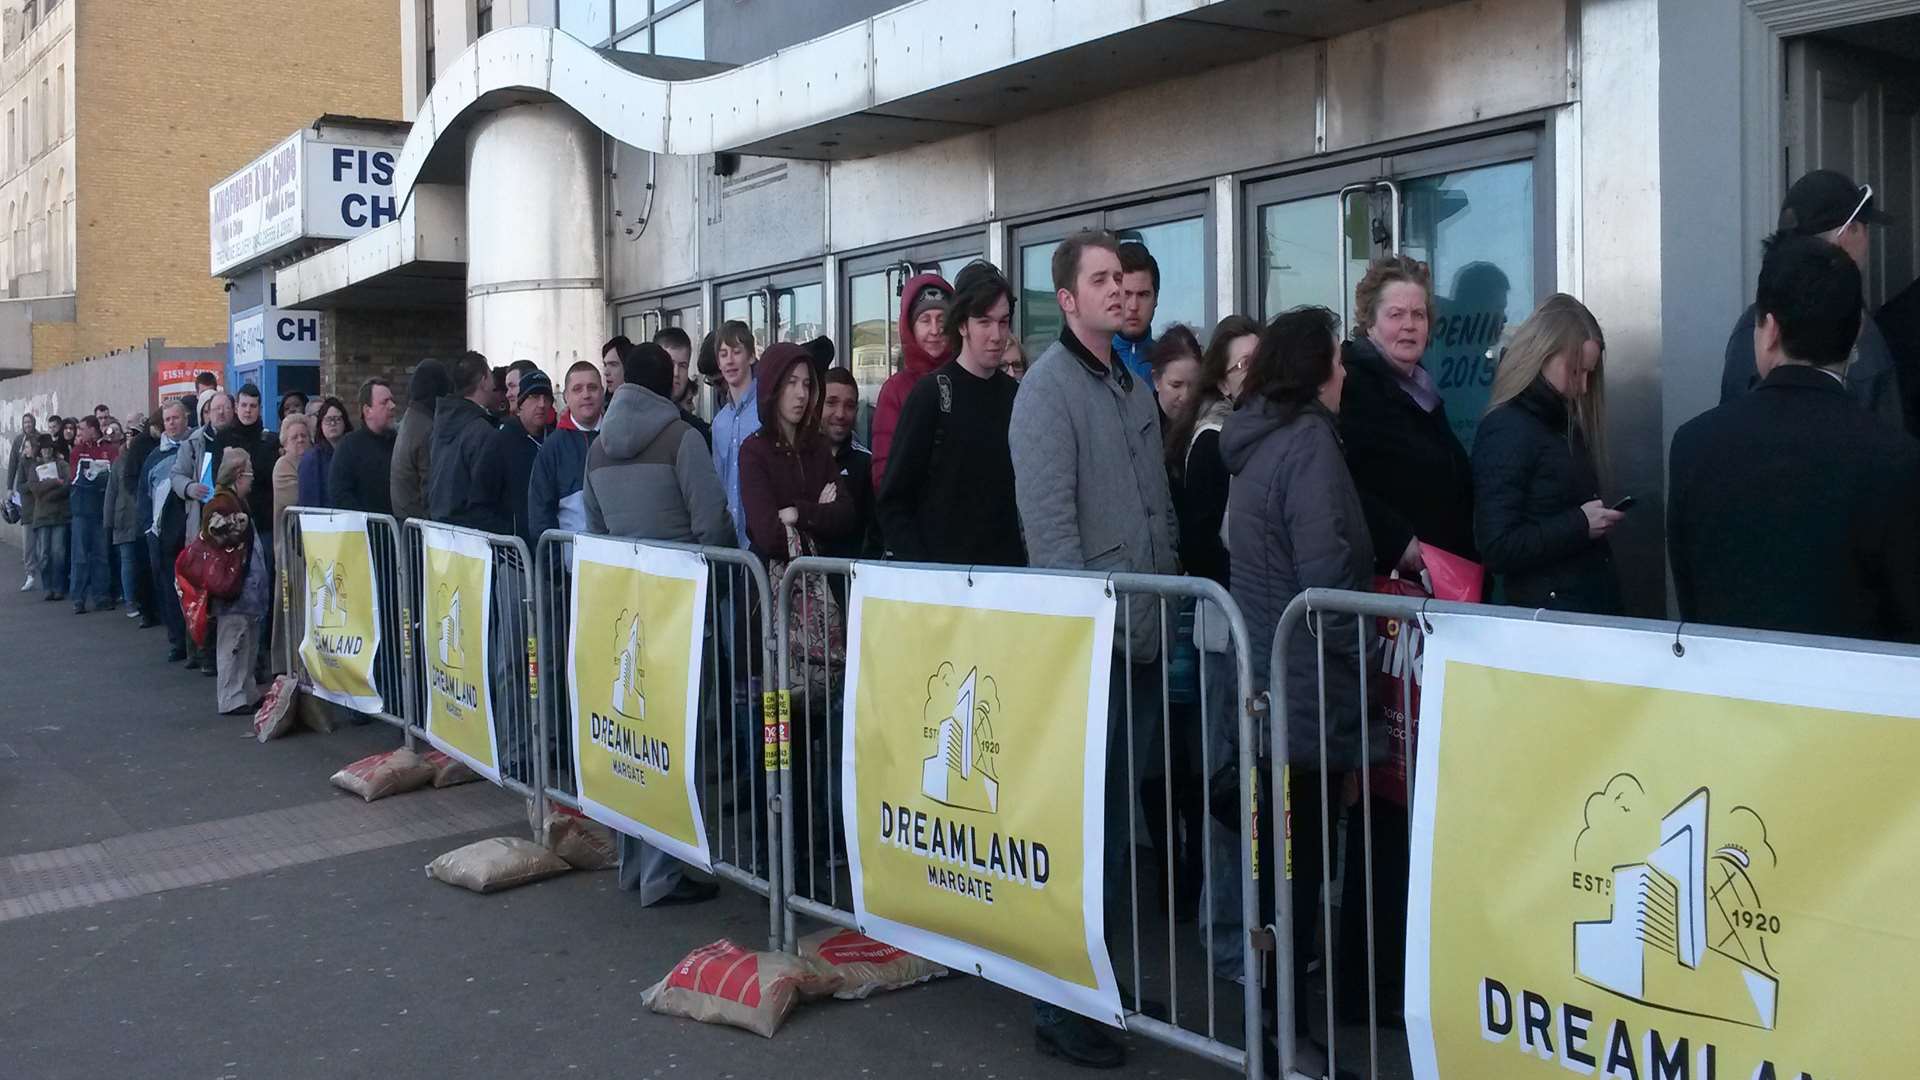 The queue for Dreamland's recruitment day yesterday.